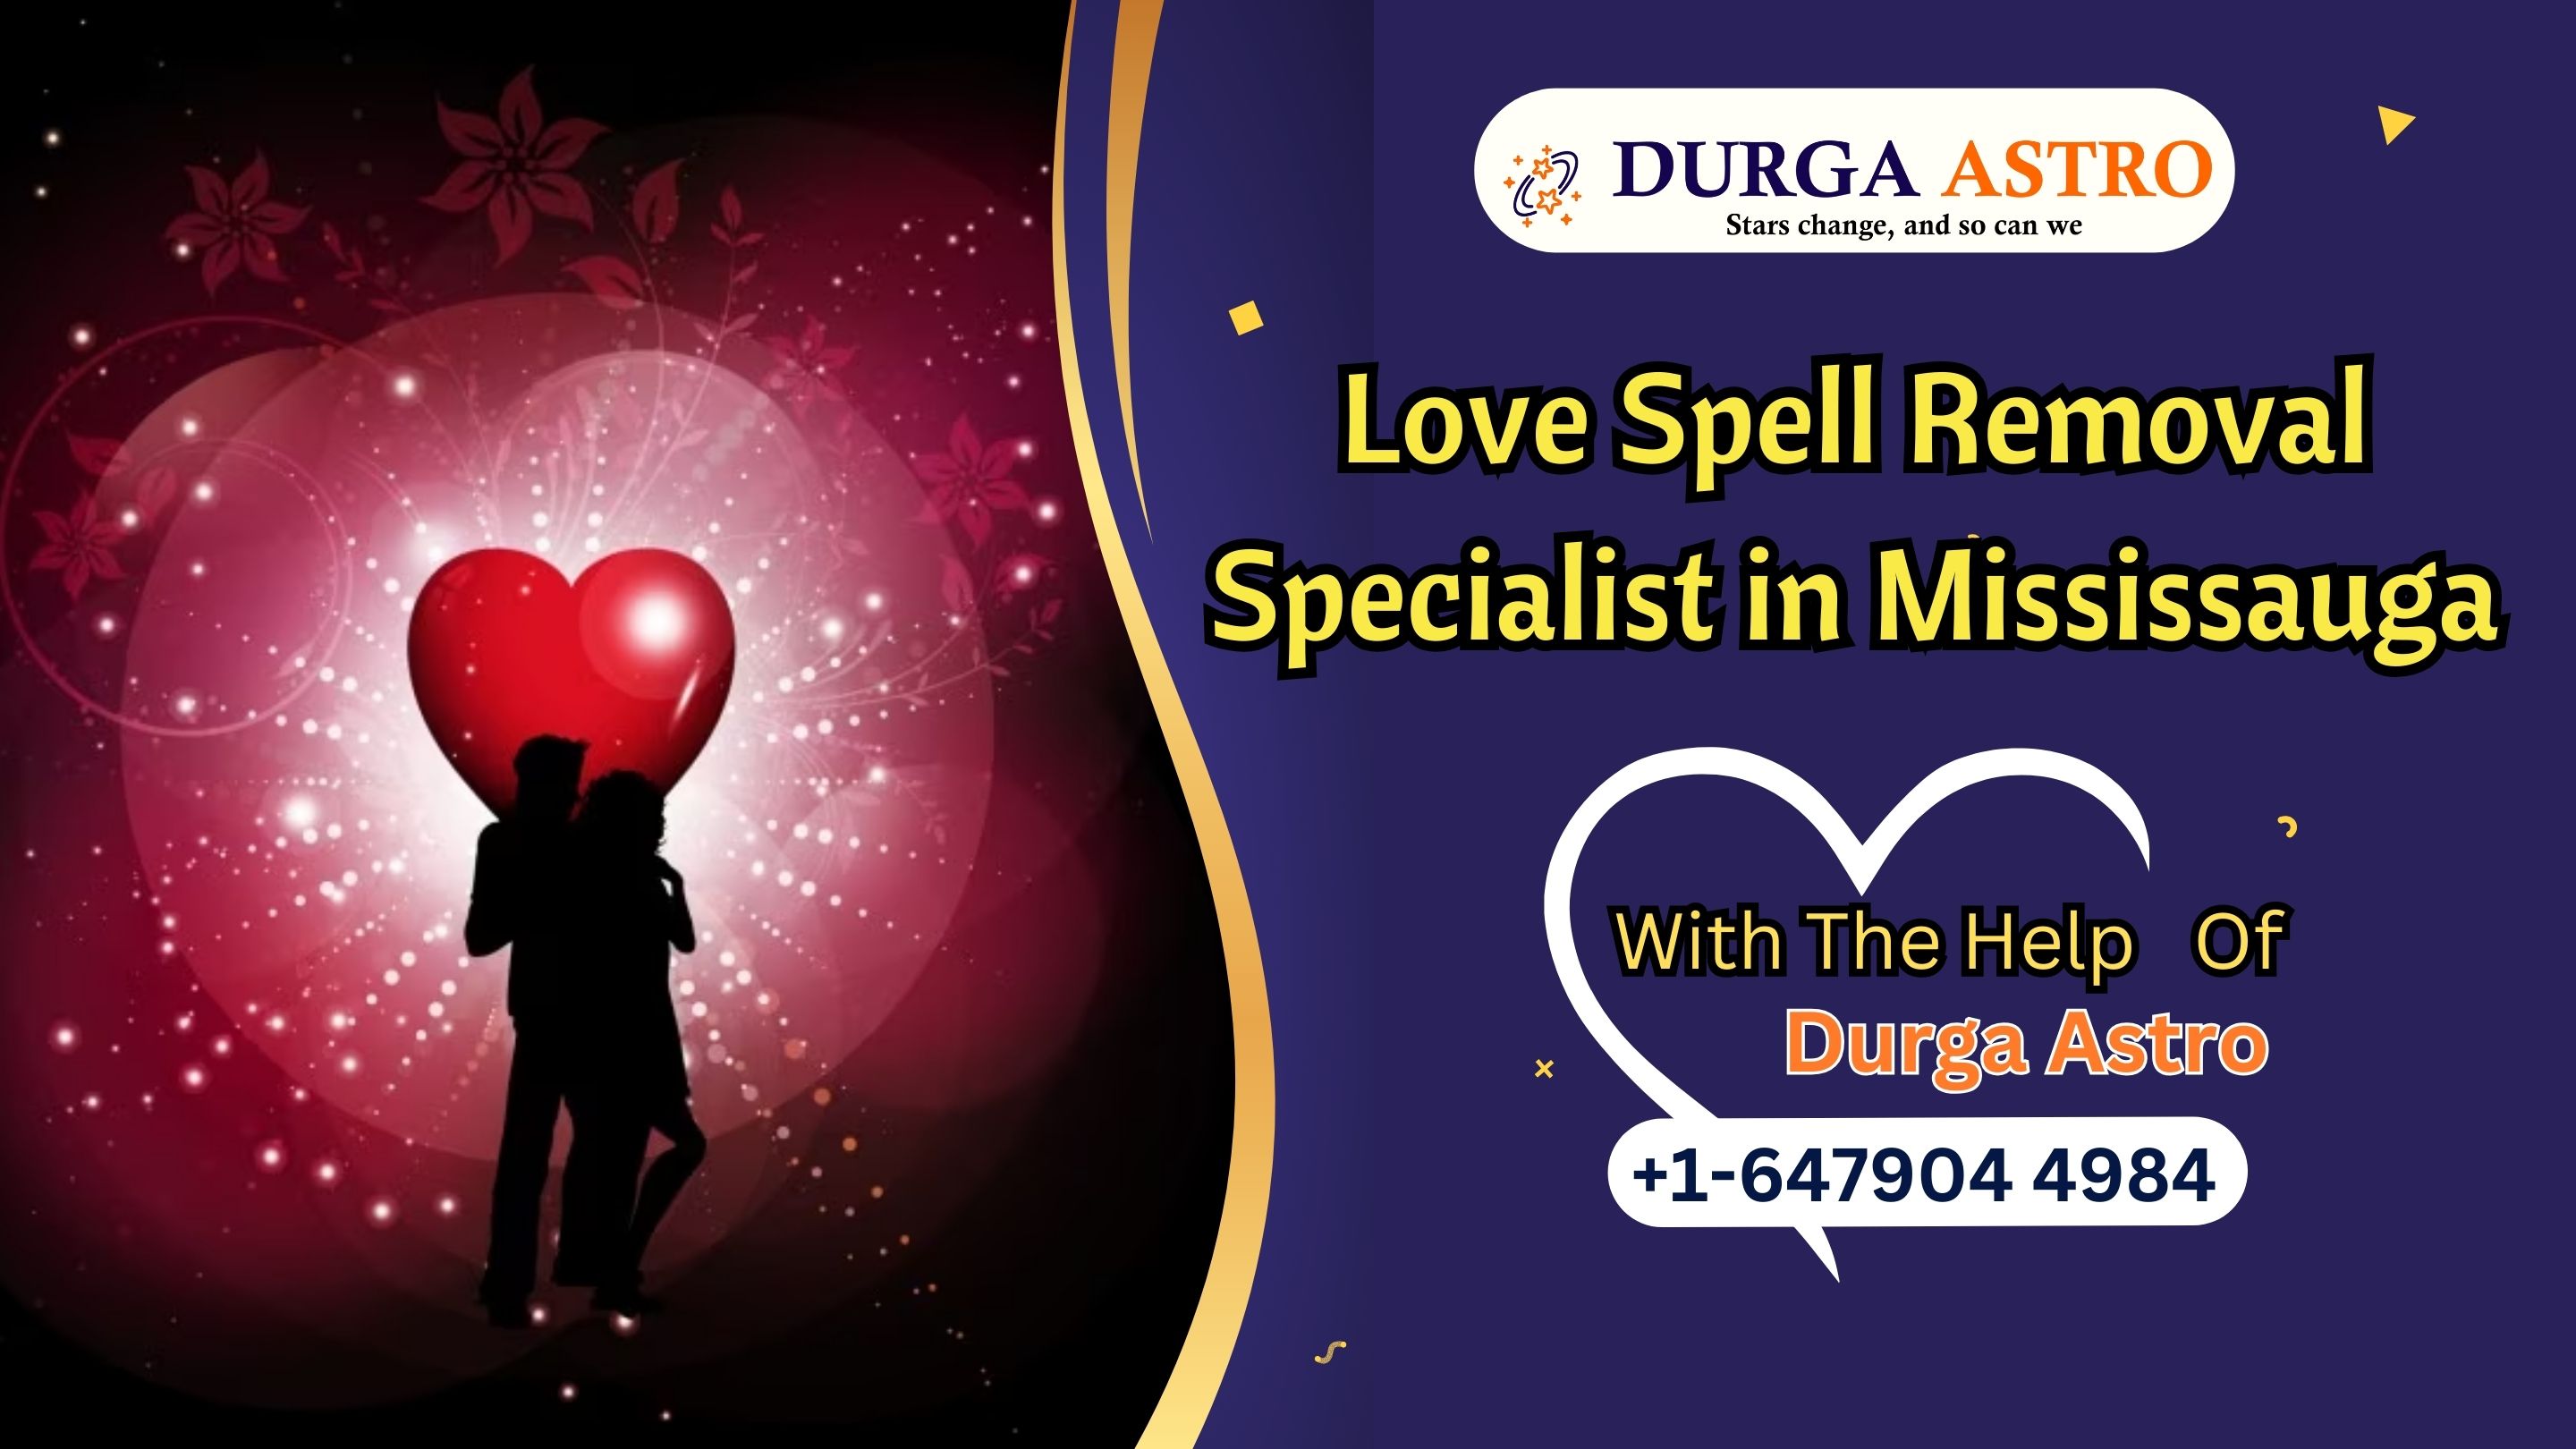 Love Spell Removal Specialist in Mississauga